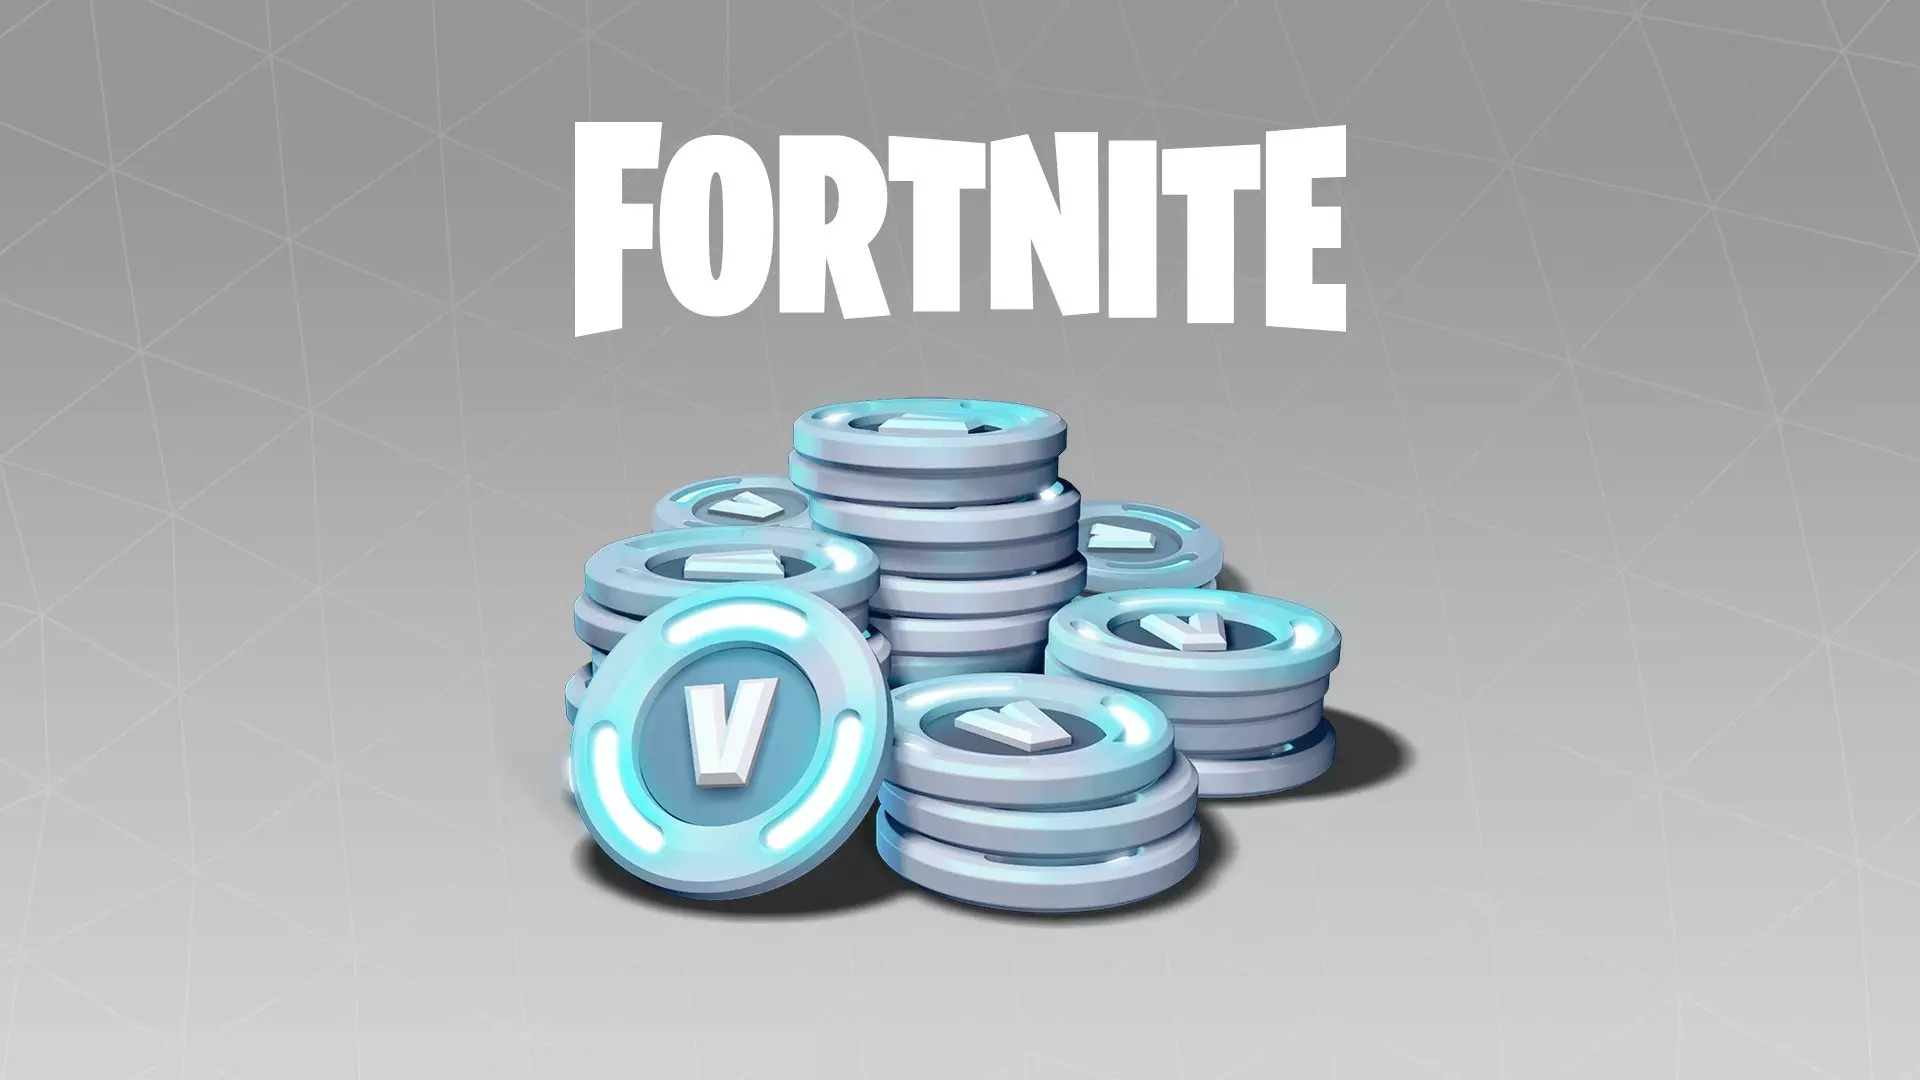 Perfect gift for Fortnite fans